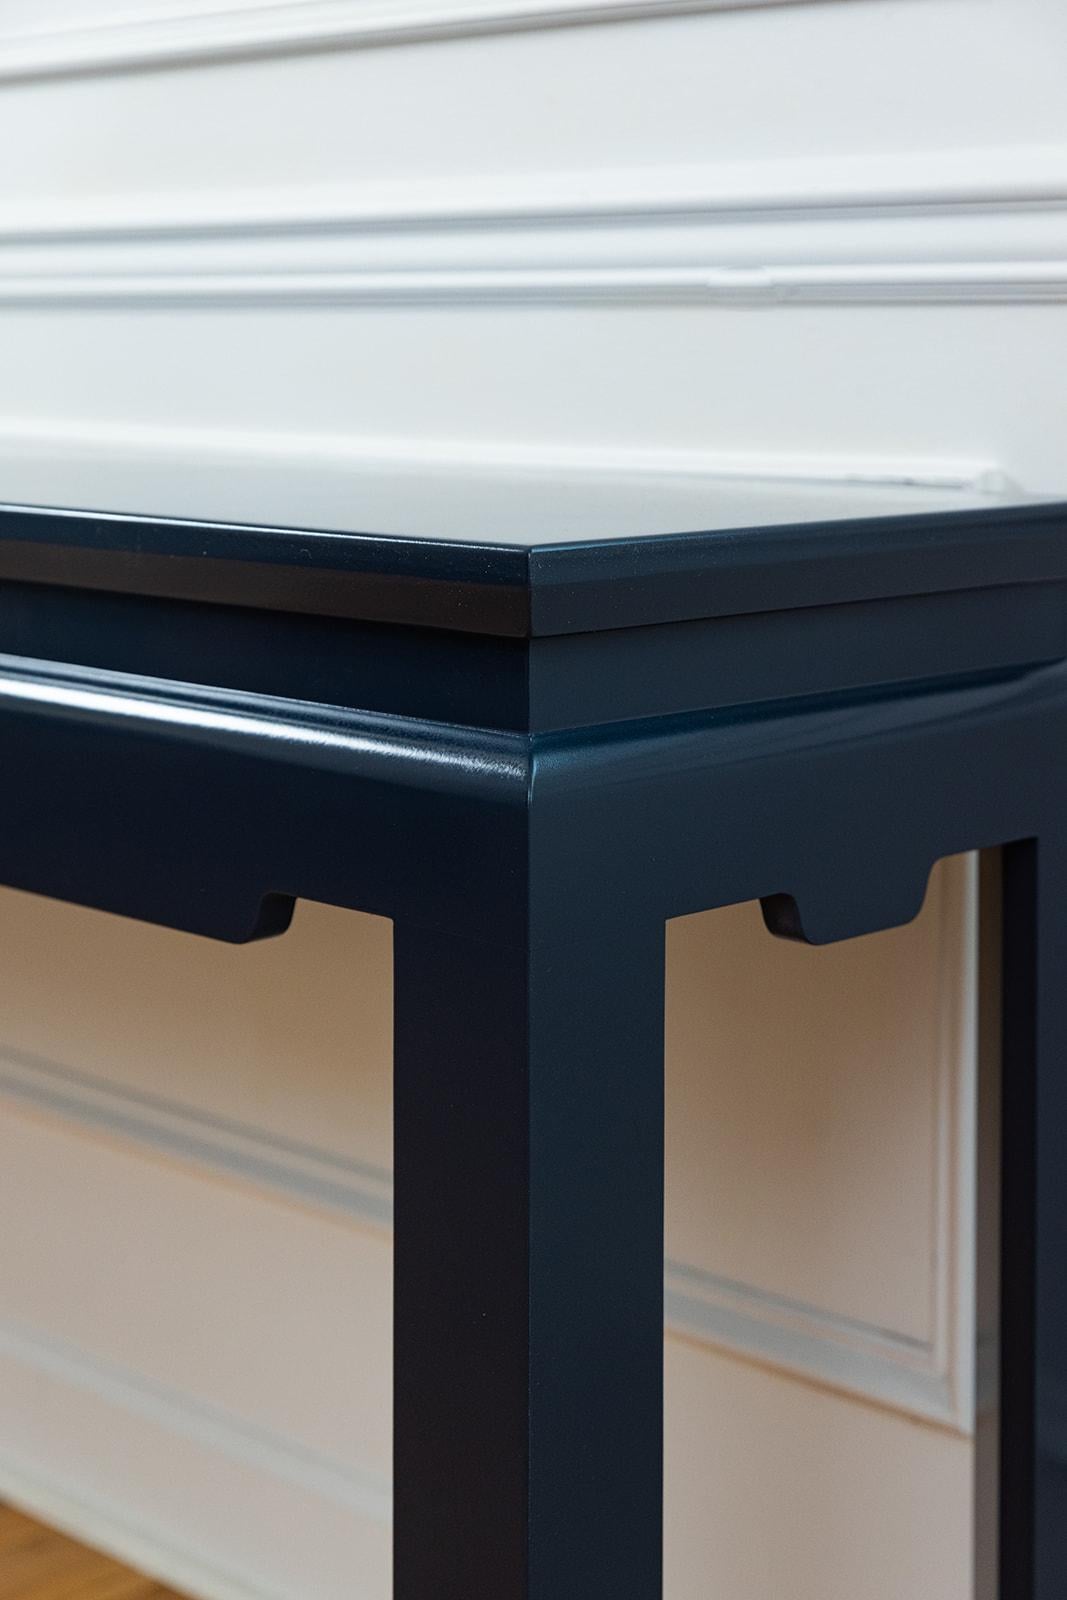 Bespoke Modern Ming Console Table Custom Built and Lacquered Hale Navy Gloss In New Condition For Sale In Raleigh, NC